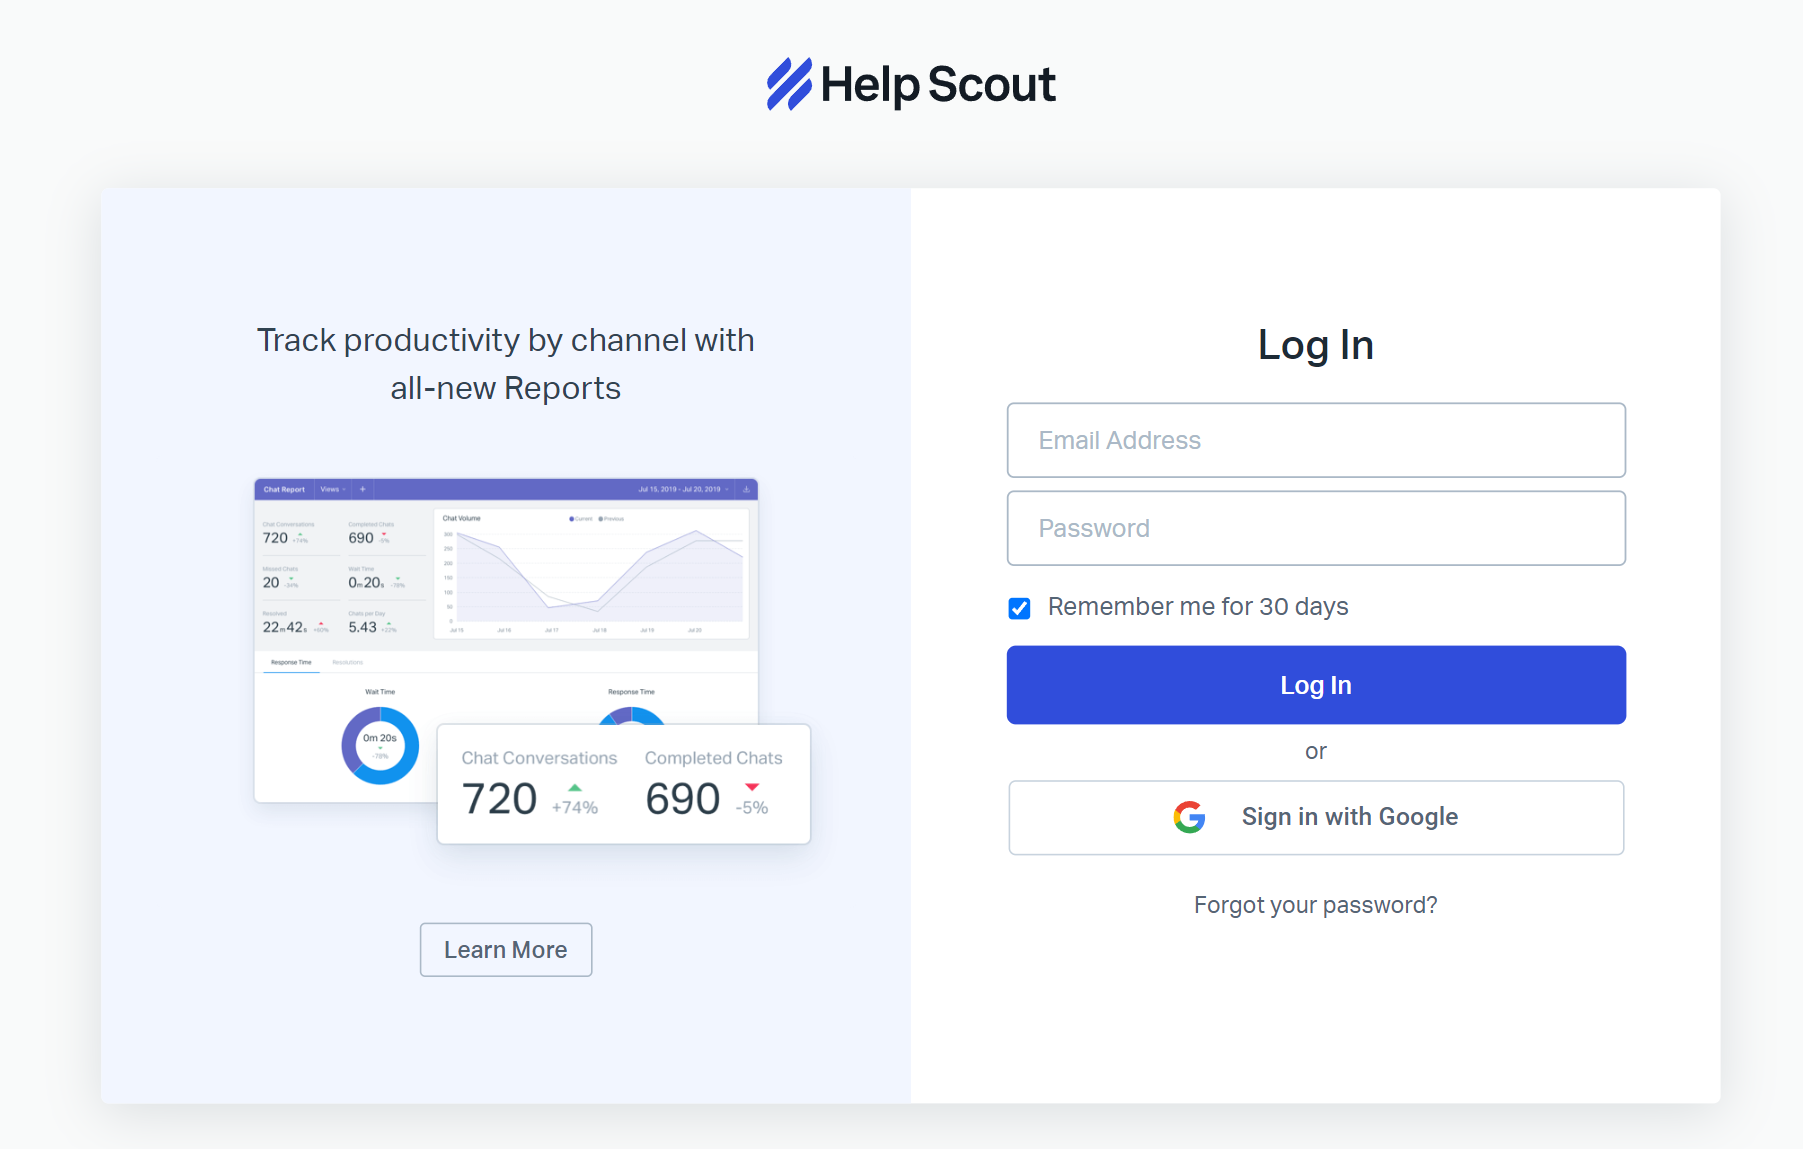 Log in to HelpScout